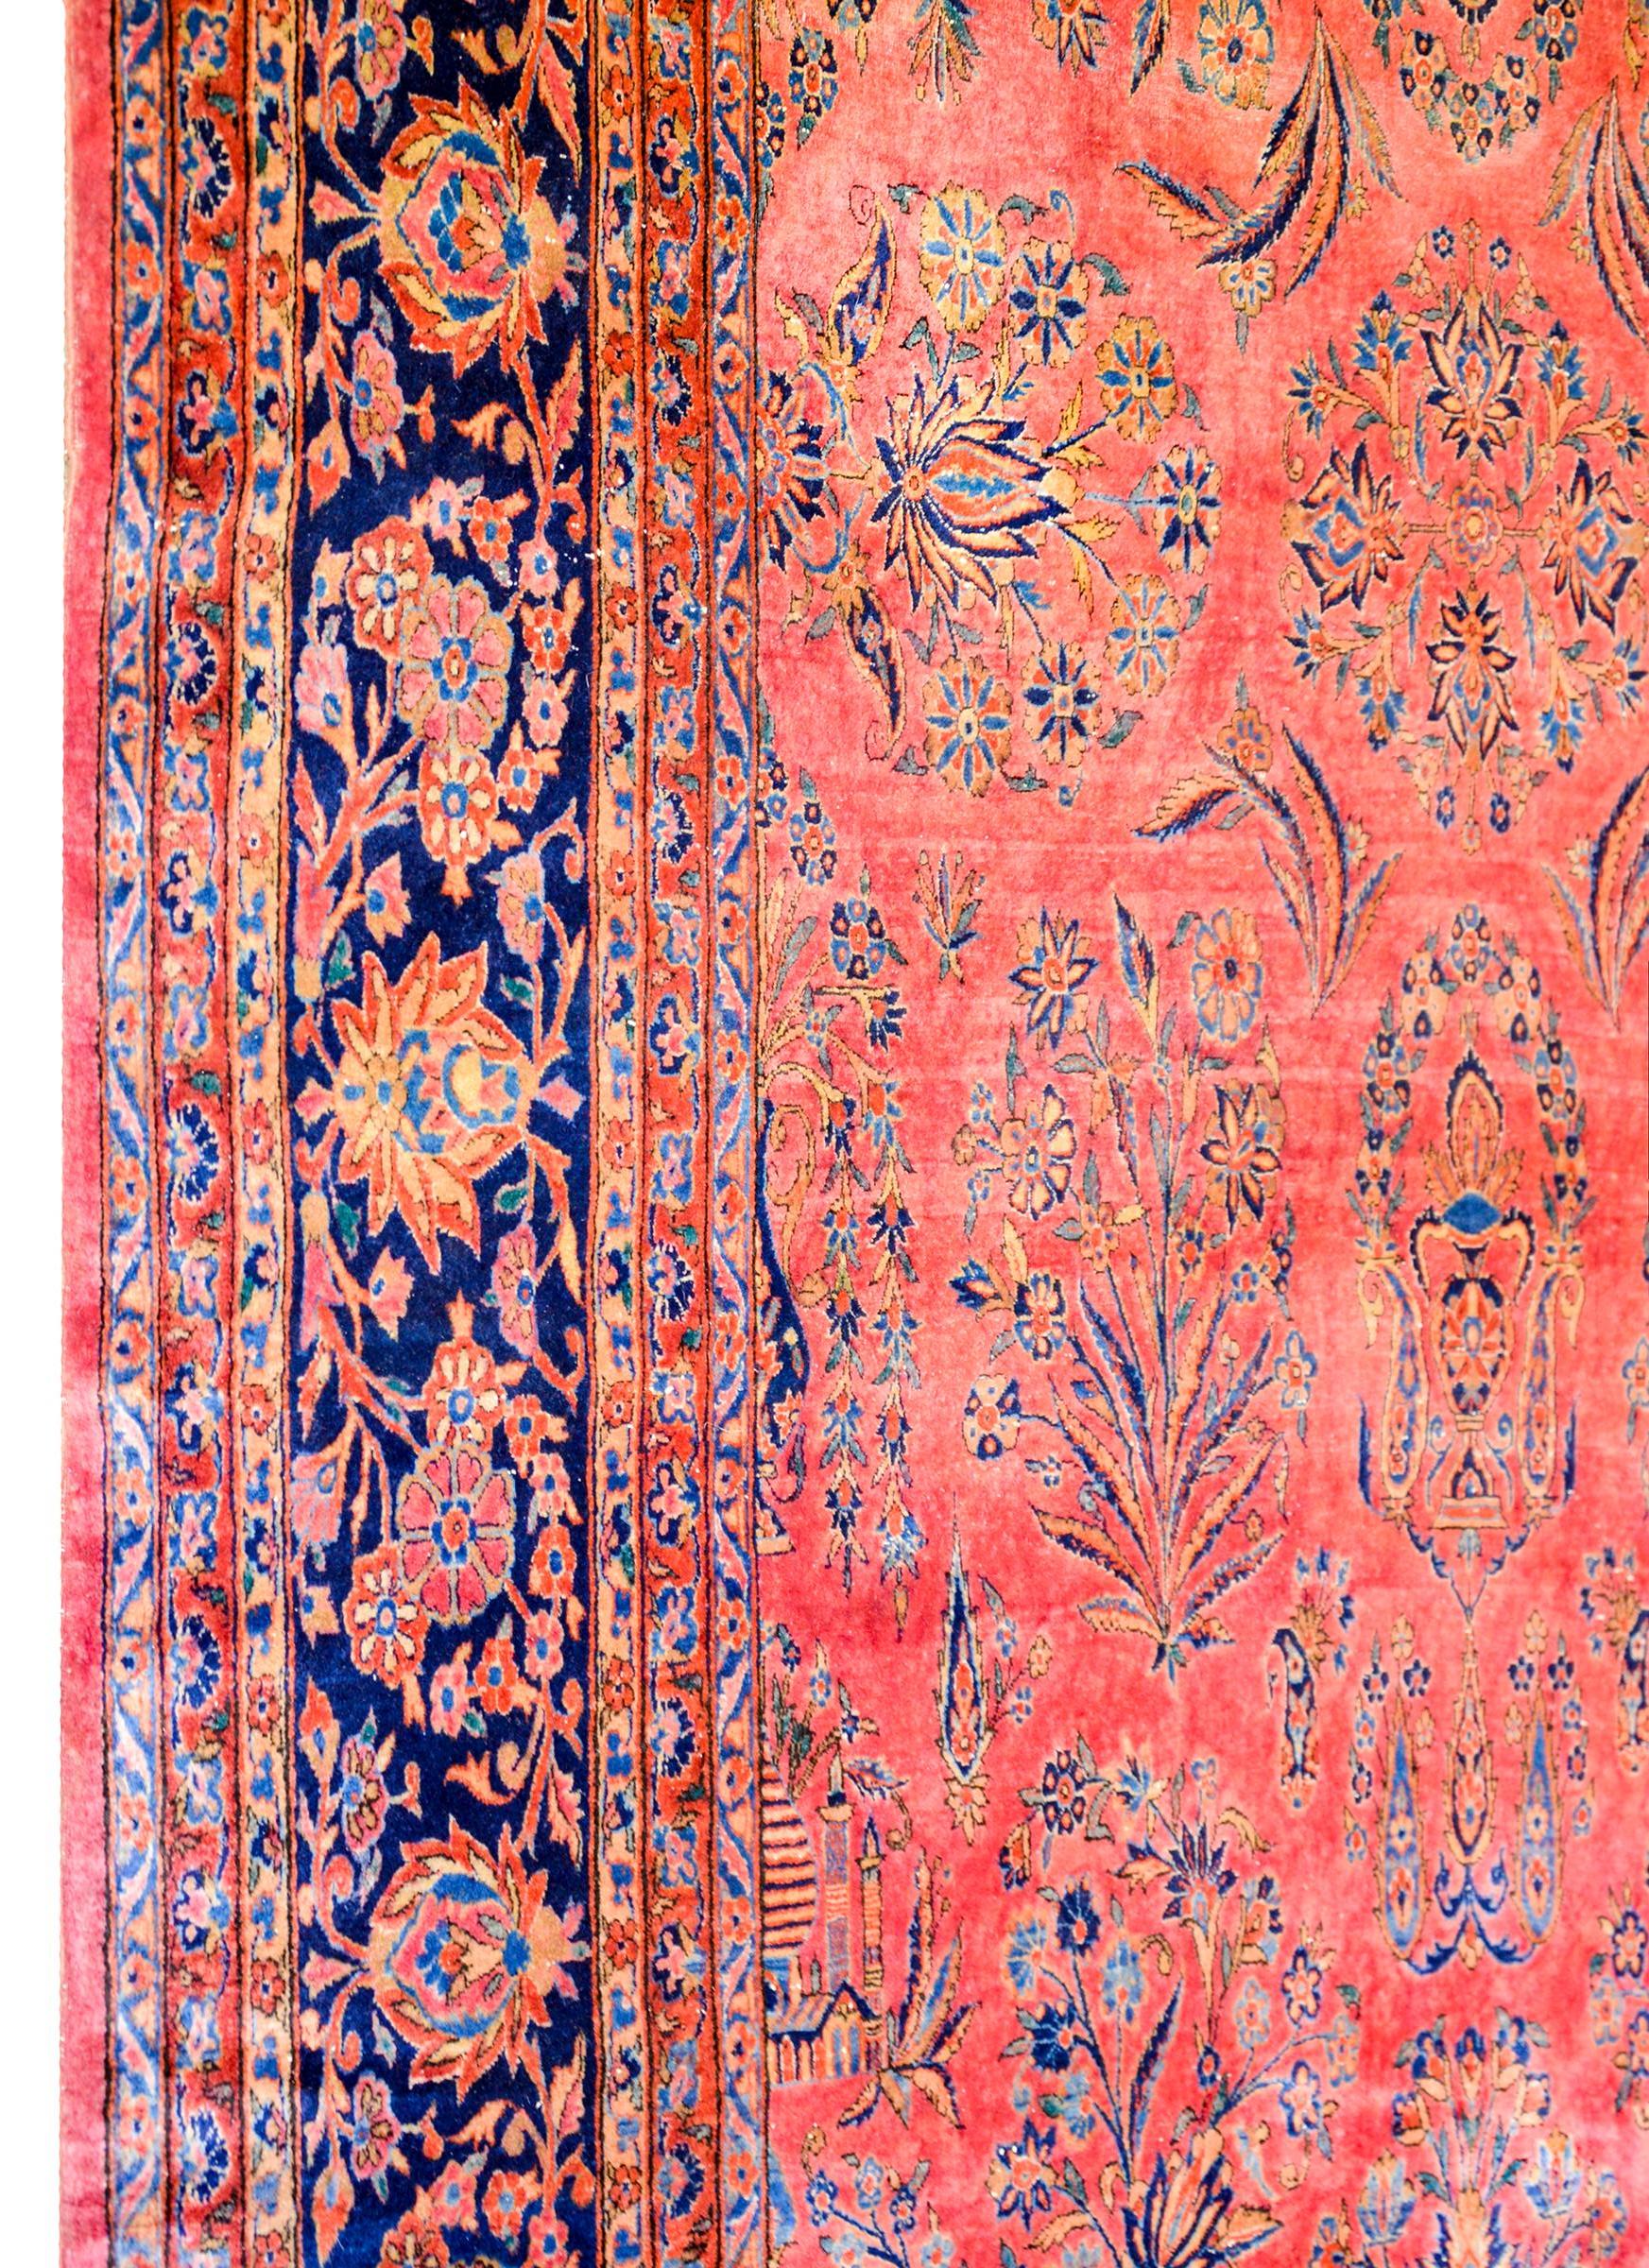 Grand 1920 Persian Kashan Rug In Good Condition For Sale In Chicago, IL